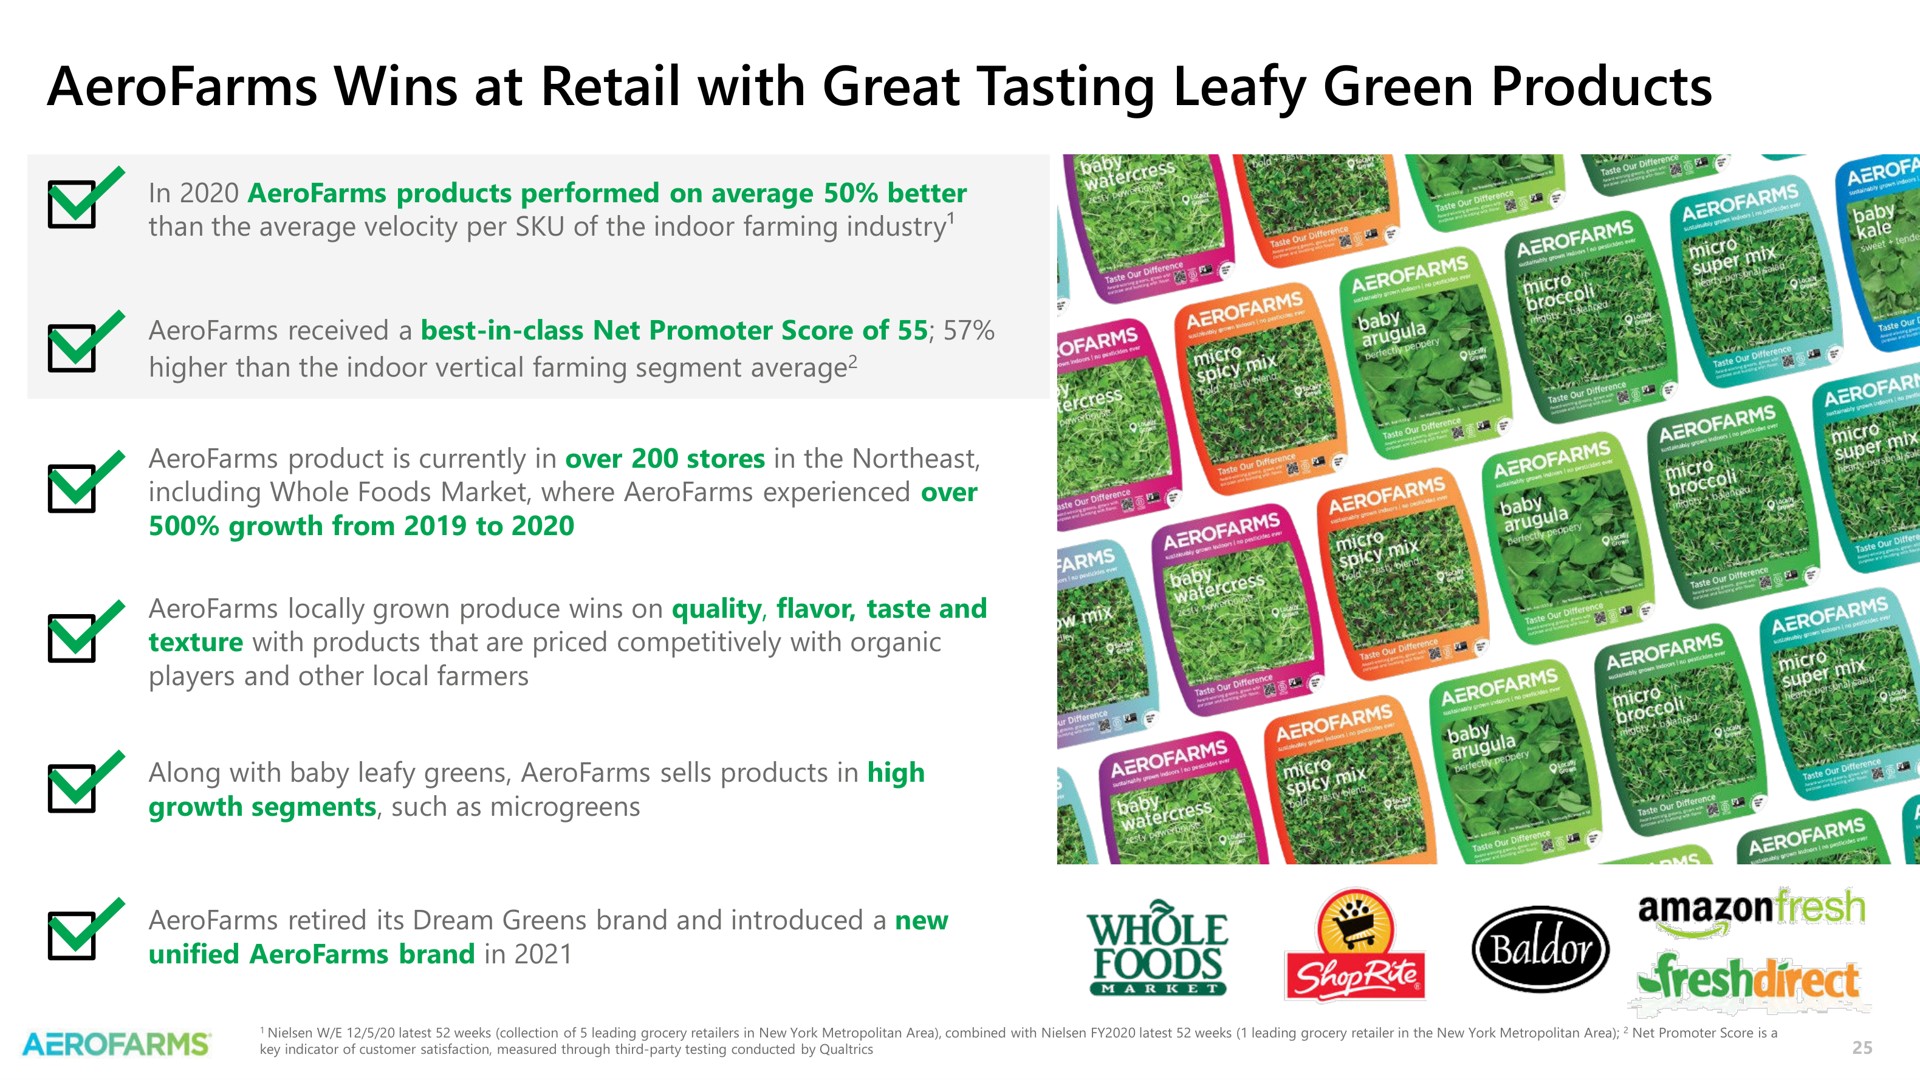 wins at retail with great tasting leafy green products | AeroFarms